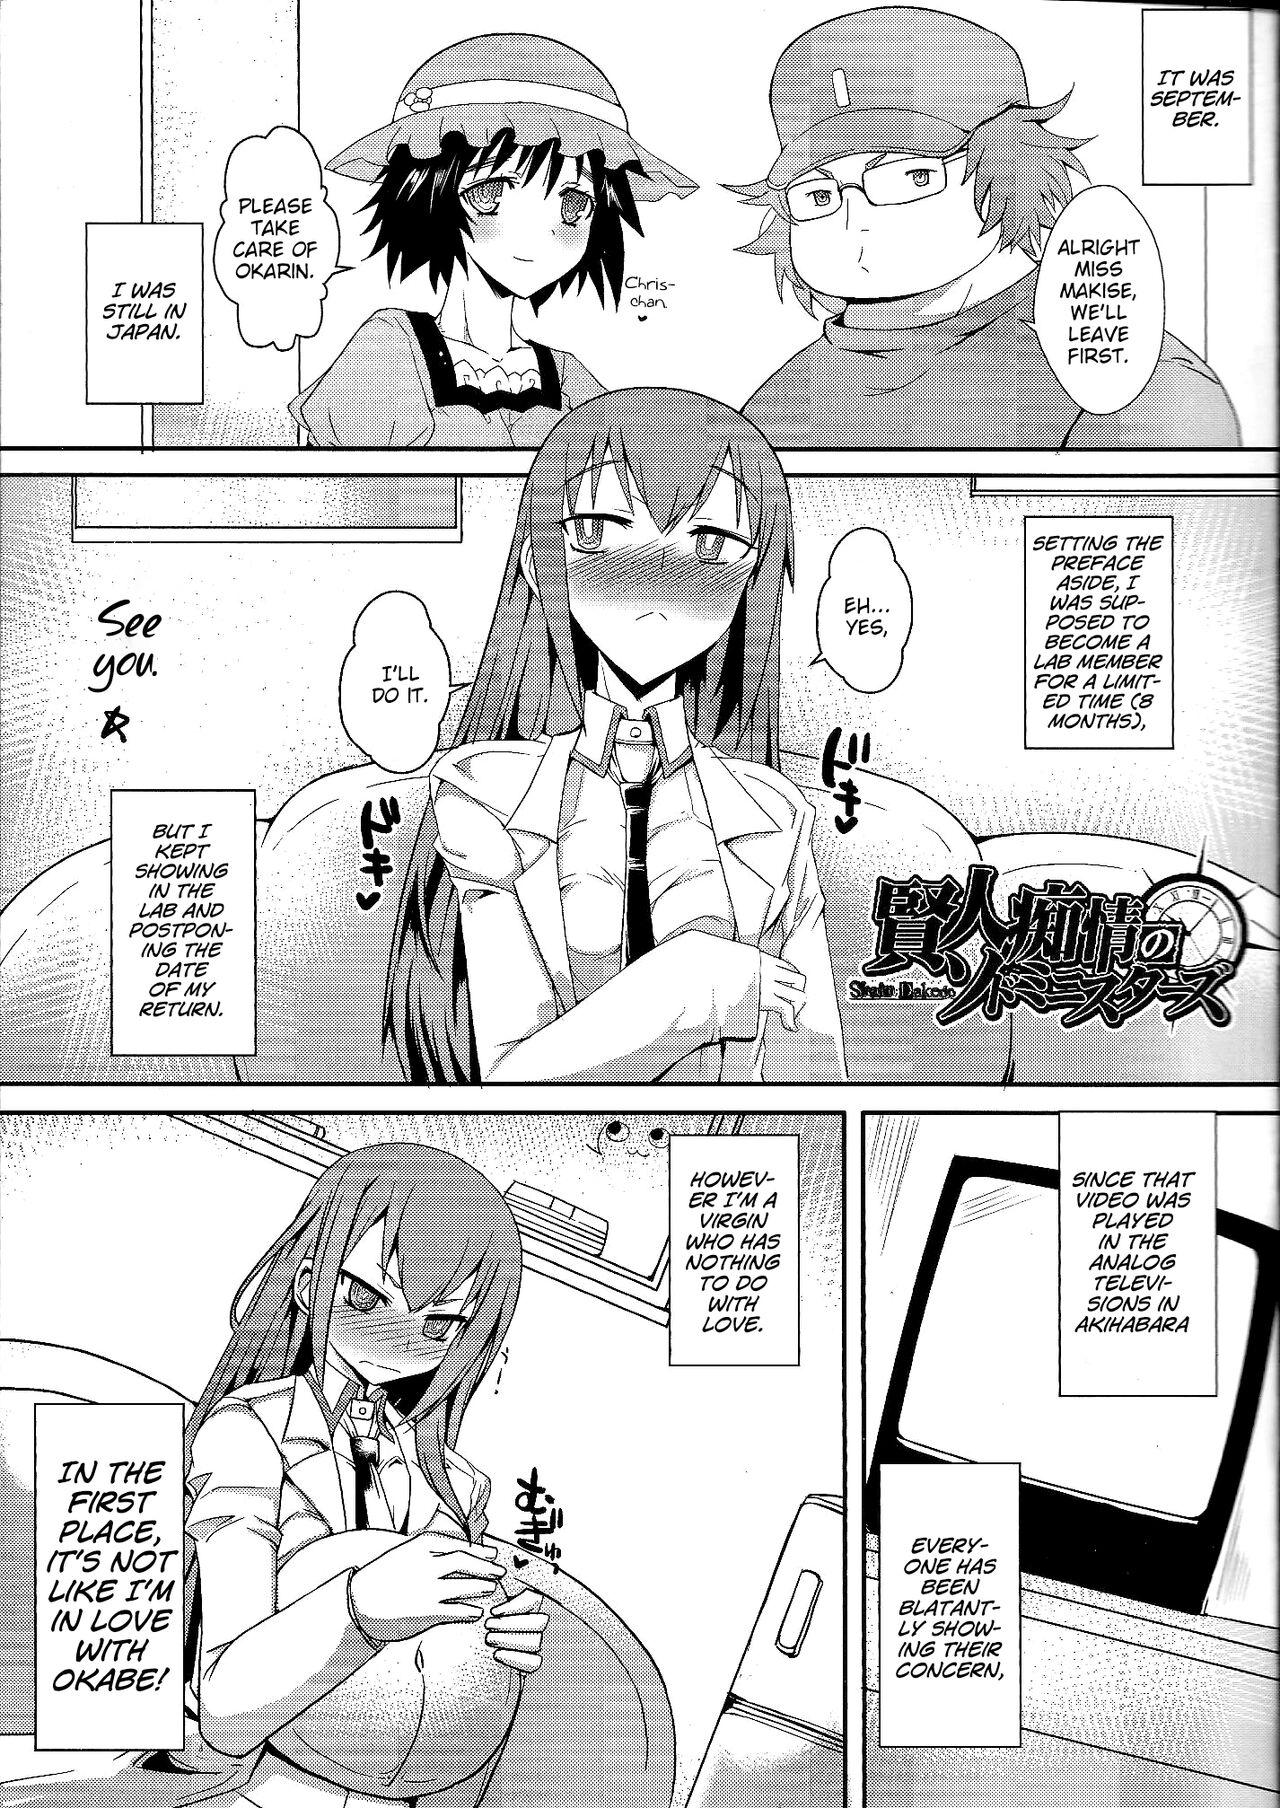 British Kenjin Chijou no Sodoministers - Steinsgate Gang - Page 4